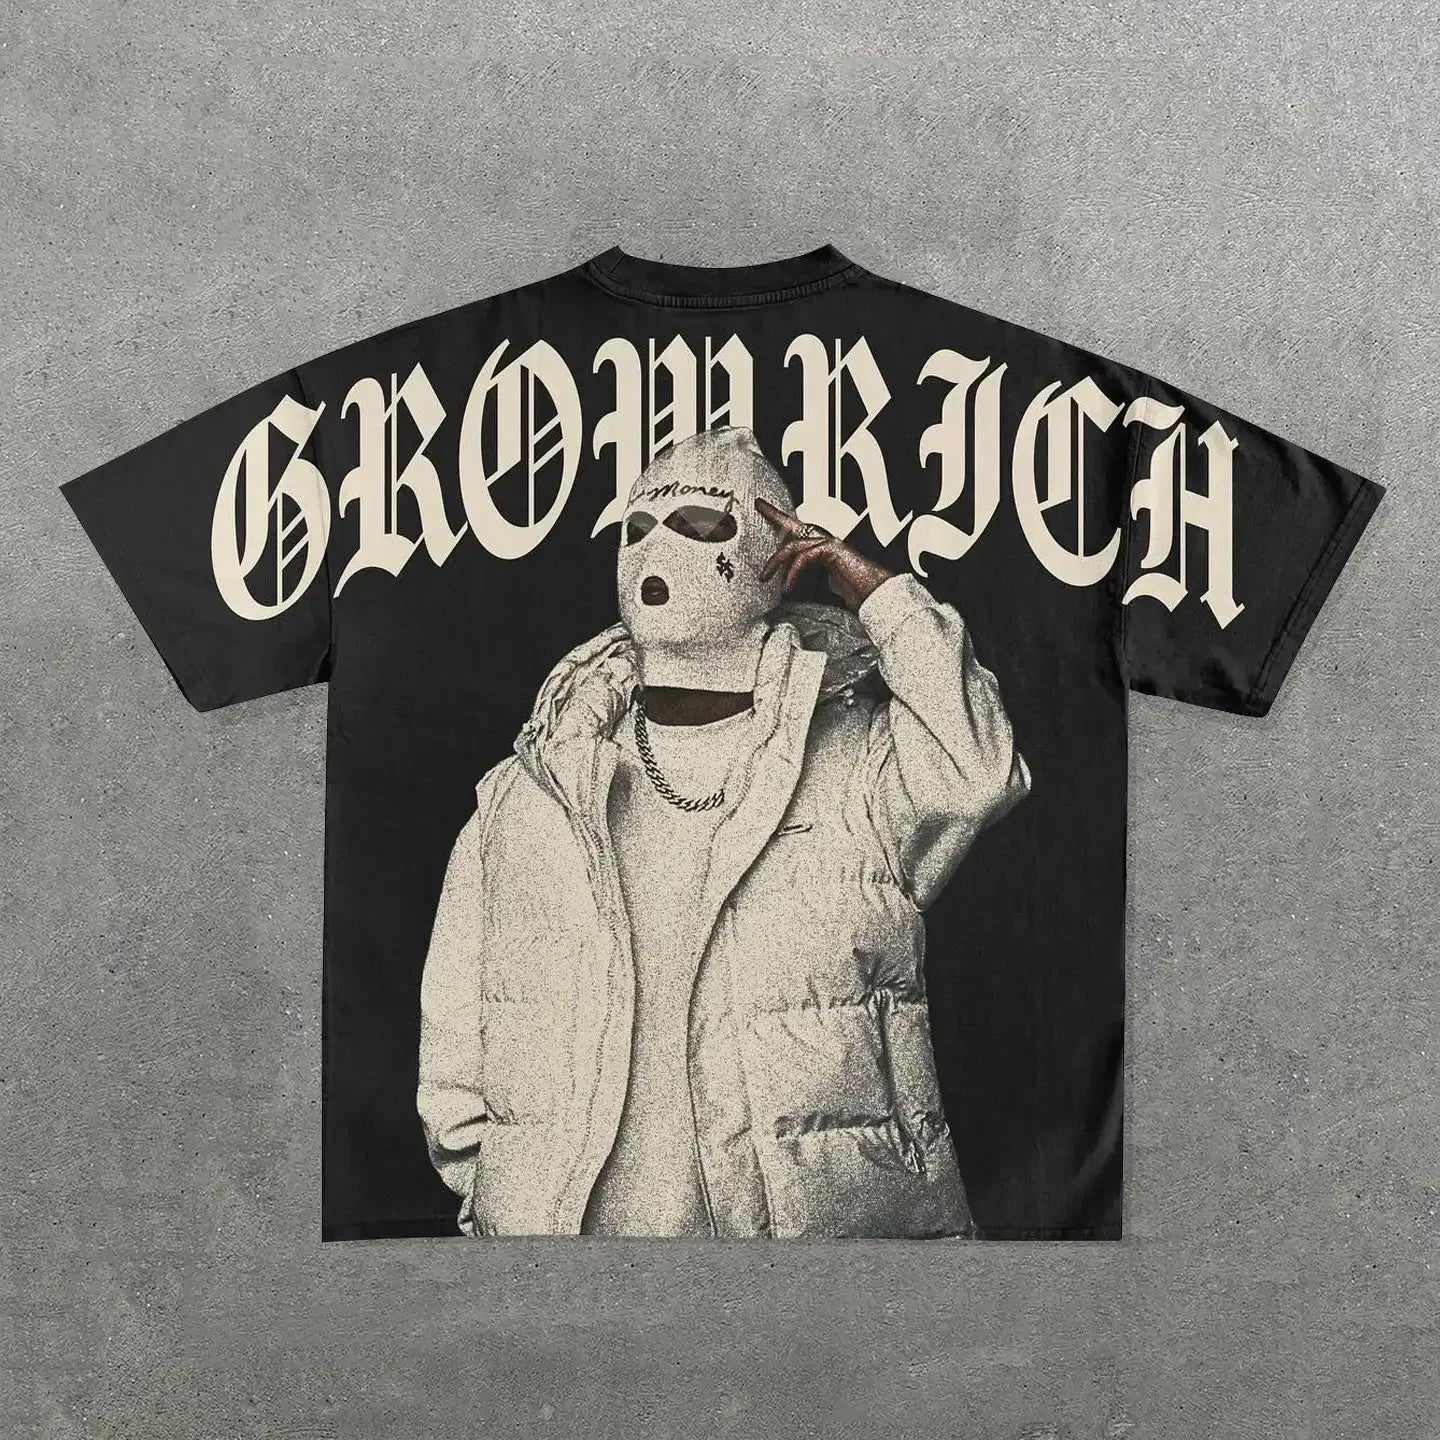 Black t-shirt with "GROWRICH" in large Gothic letters across the back. Below the text is a printed image of a person wearing a ski mask, jacket, and chain necklace. This Maramalive™ Punk Hip Hop Graphic T Shirts Mens Vintage Y2k Top Goth Oversized T Shirt Fashion Loose Casual Short Sleeve Streetwear embodies punk hip hop graphic t-shirts style.